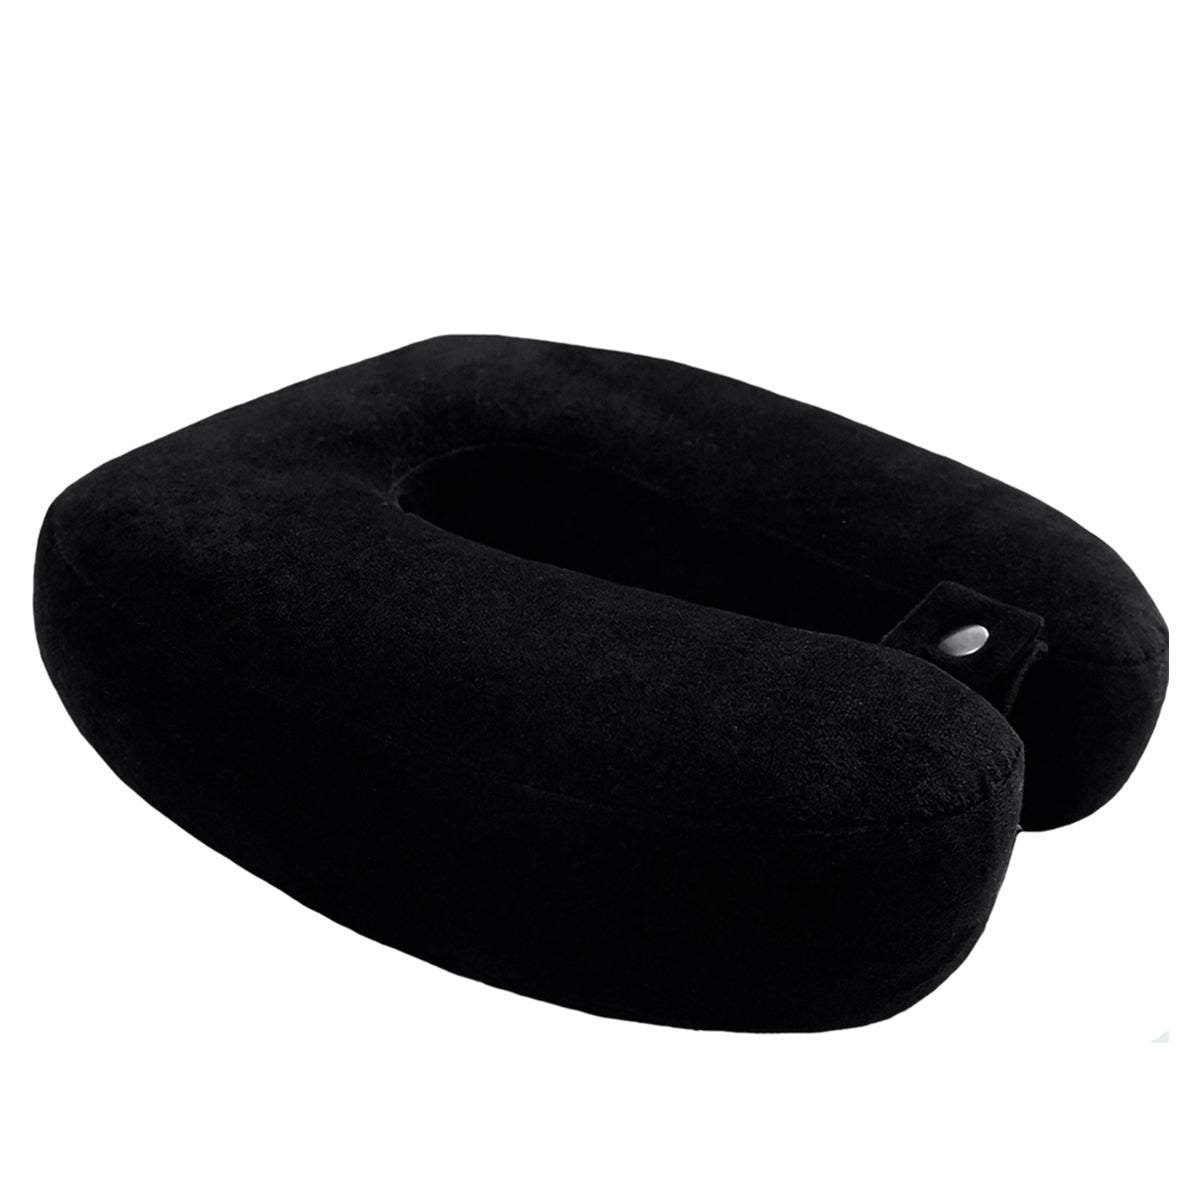 NECK CUSHION WITH ADJUSTABLE CLOSURE 9601 